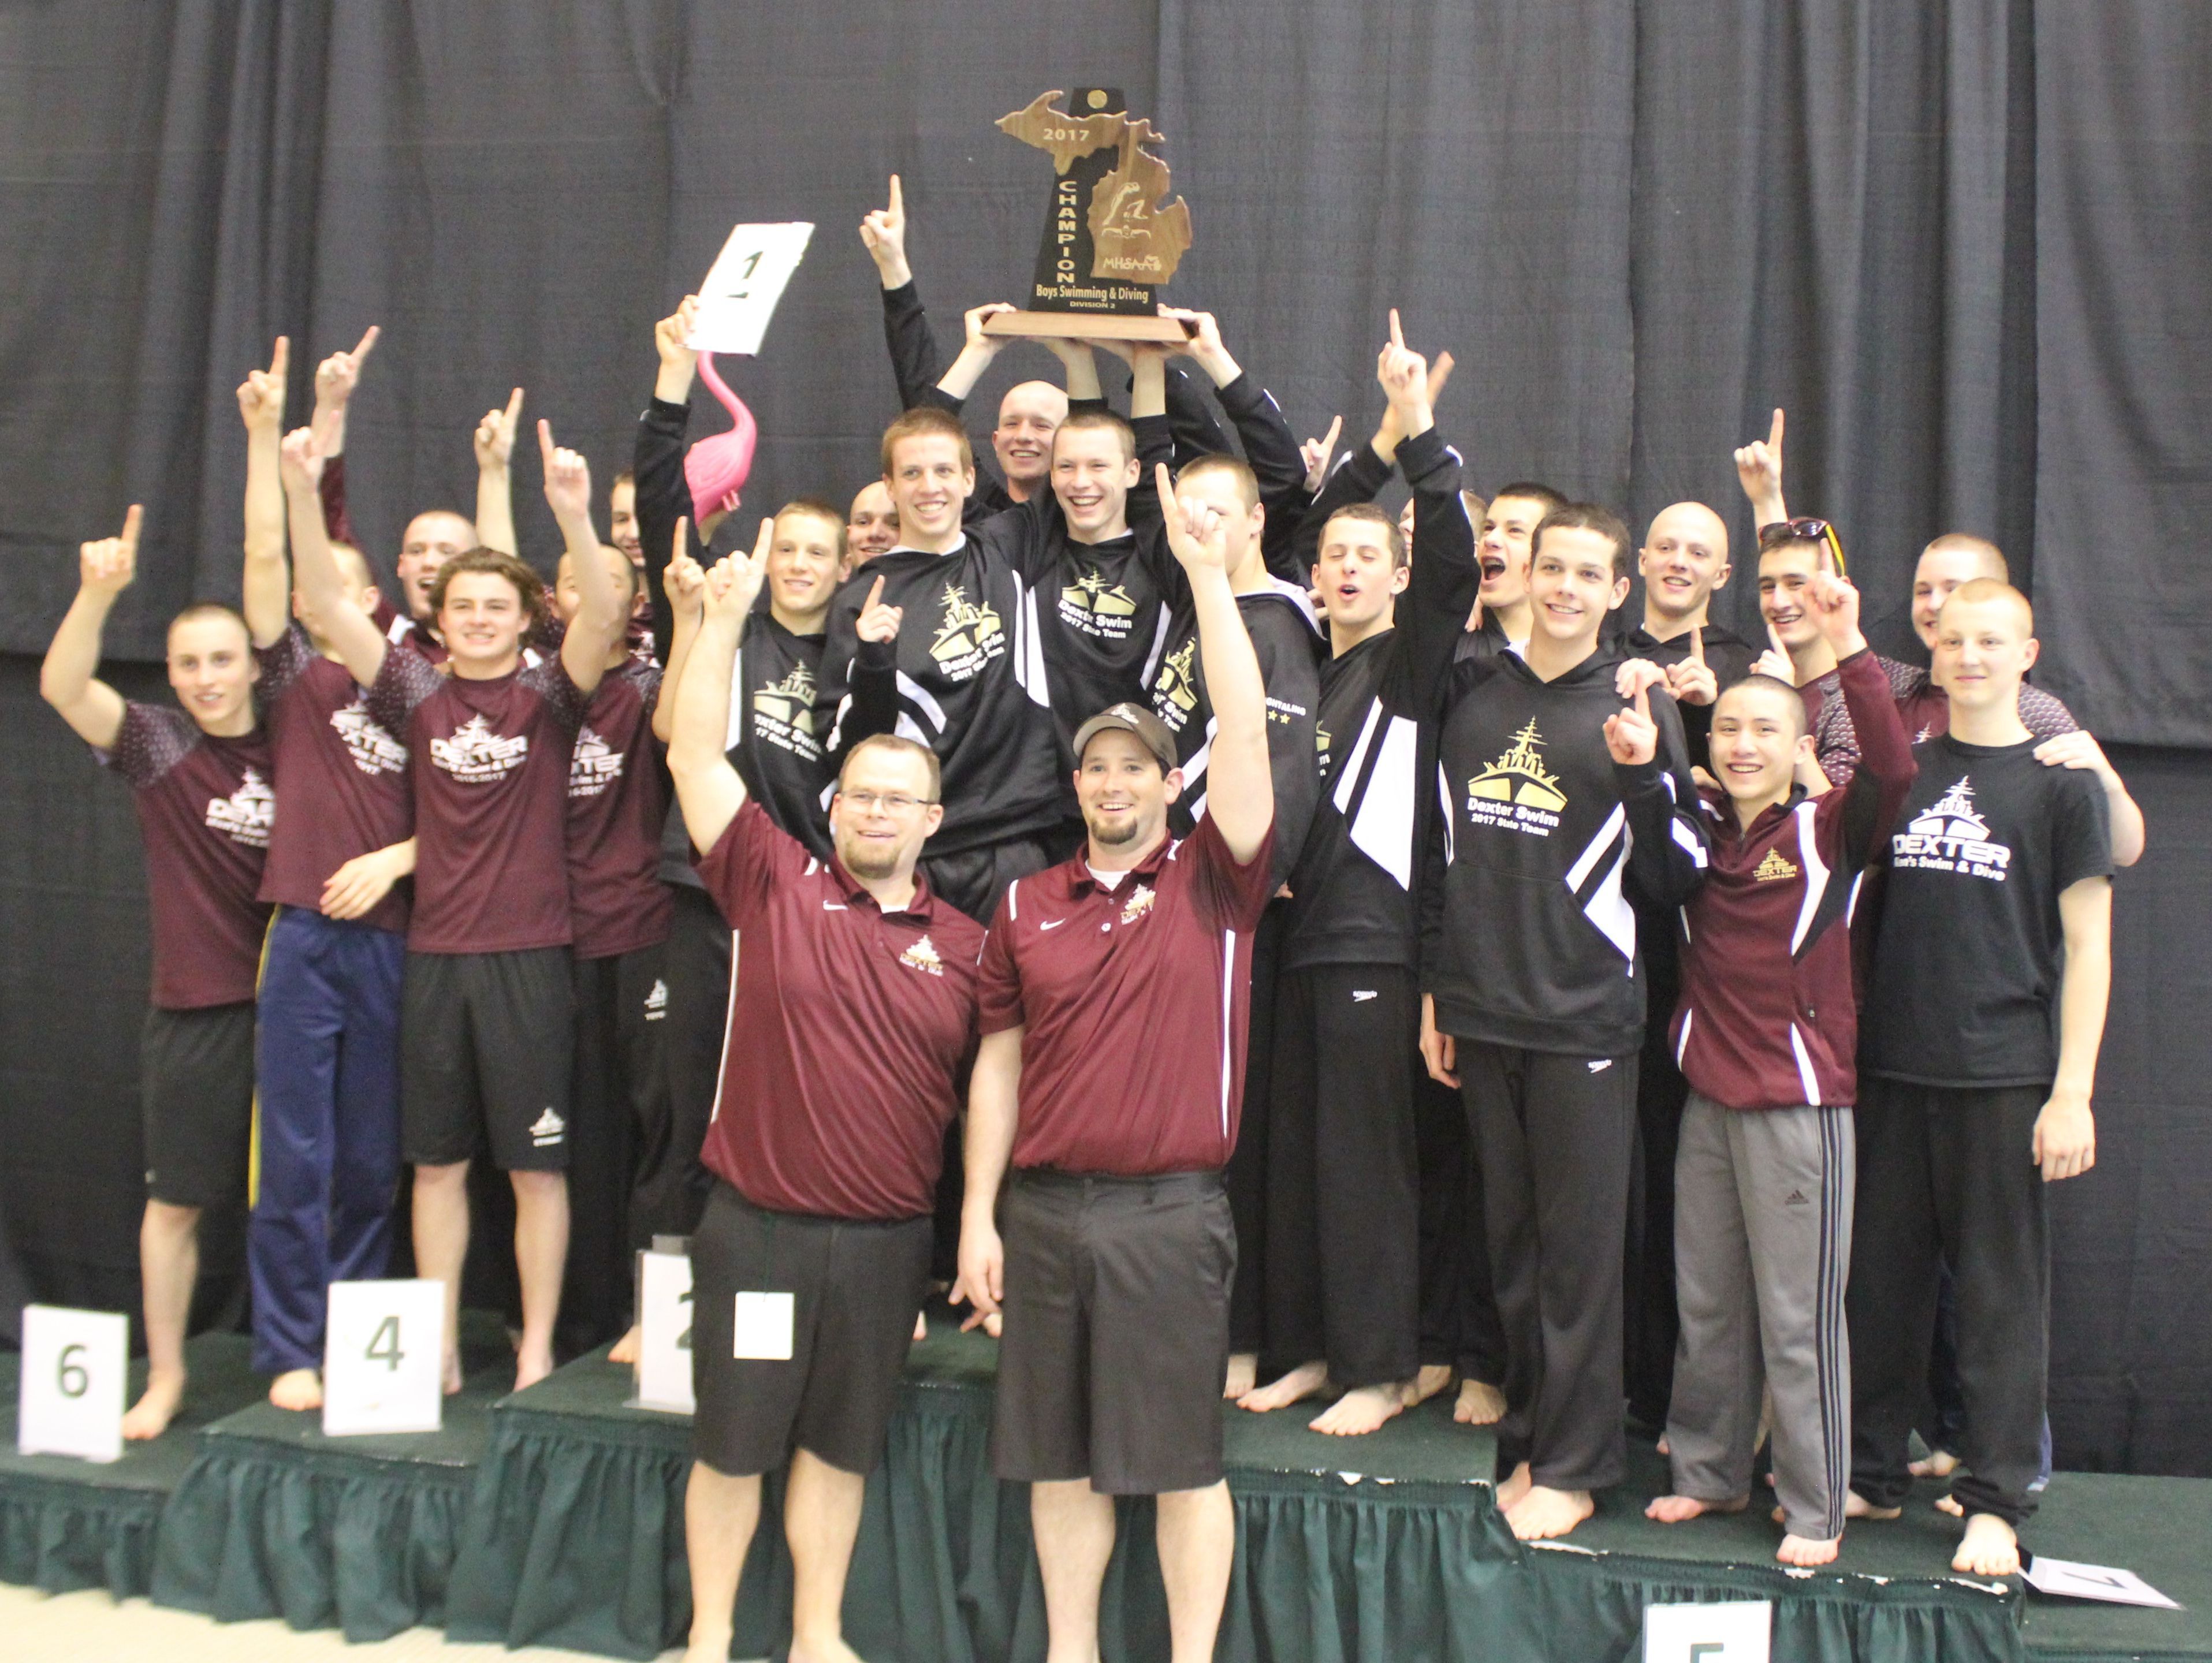 Dexter celebrates after winning its second straight Division 2 state swimming and diving championship at Eastern Michigan on Saturday, March 11, 2017.